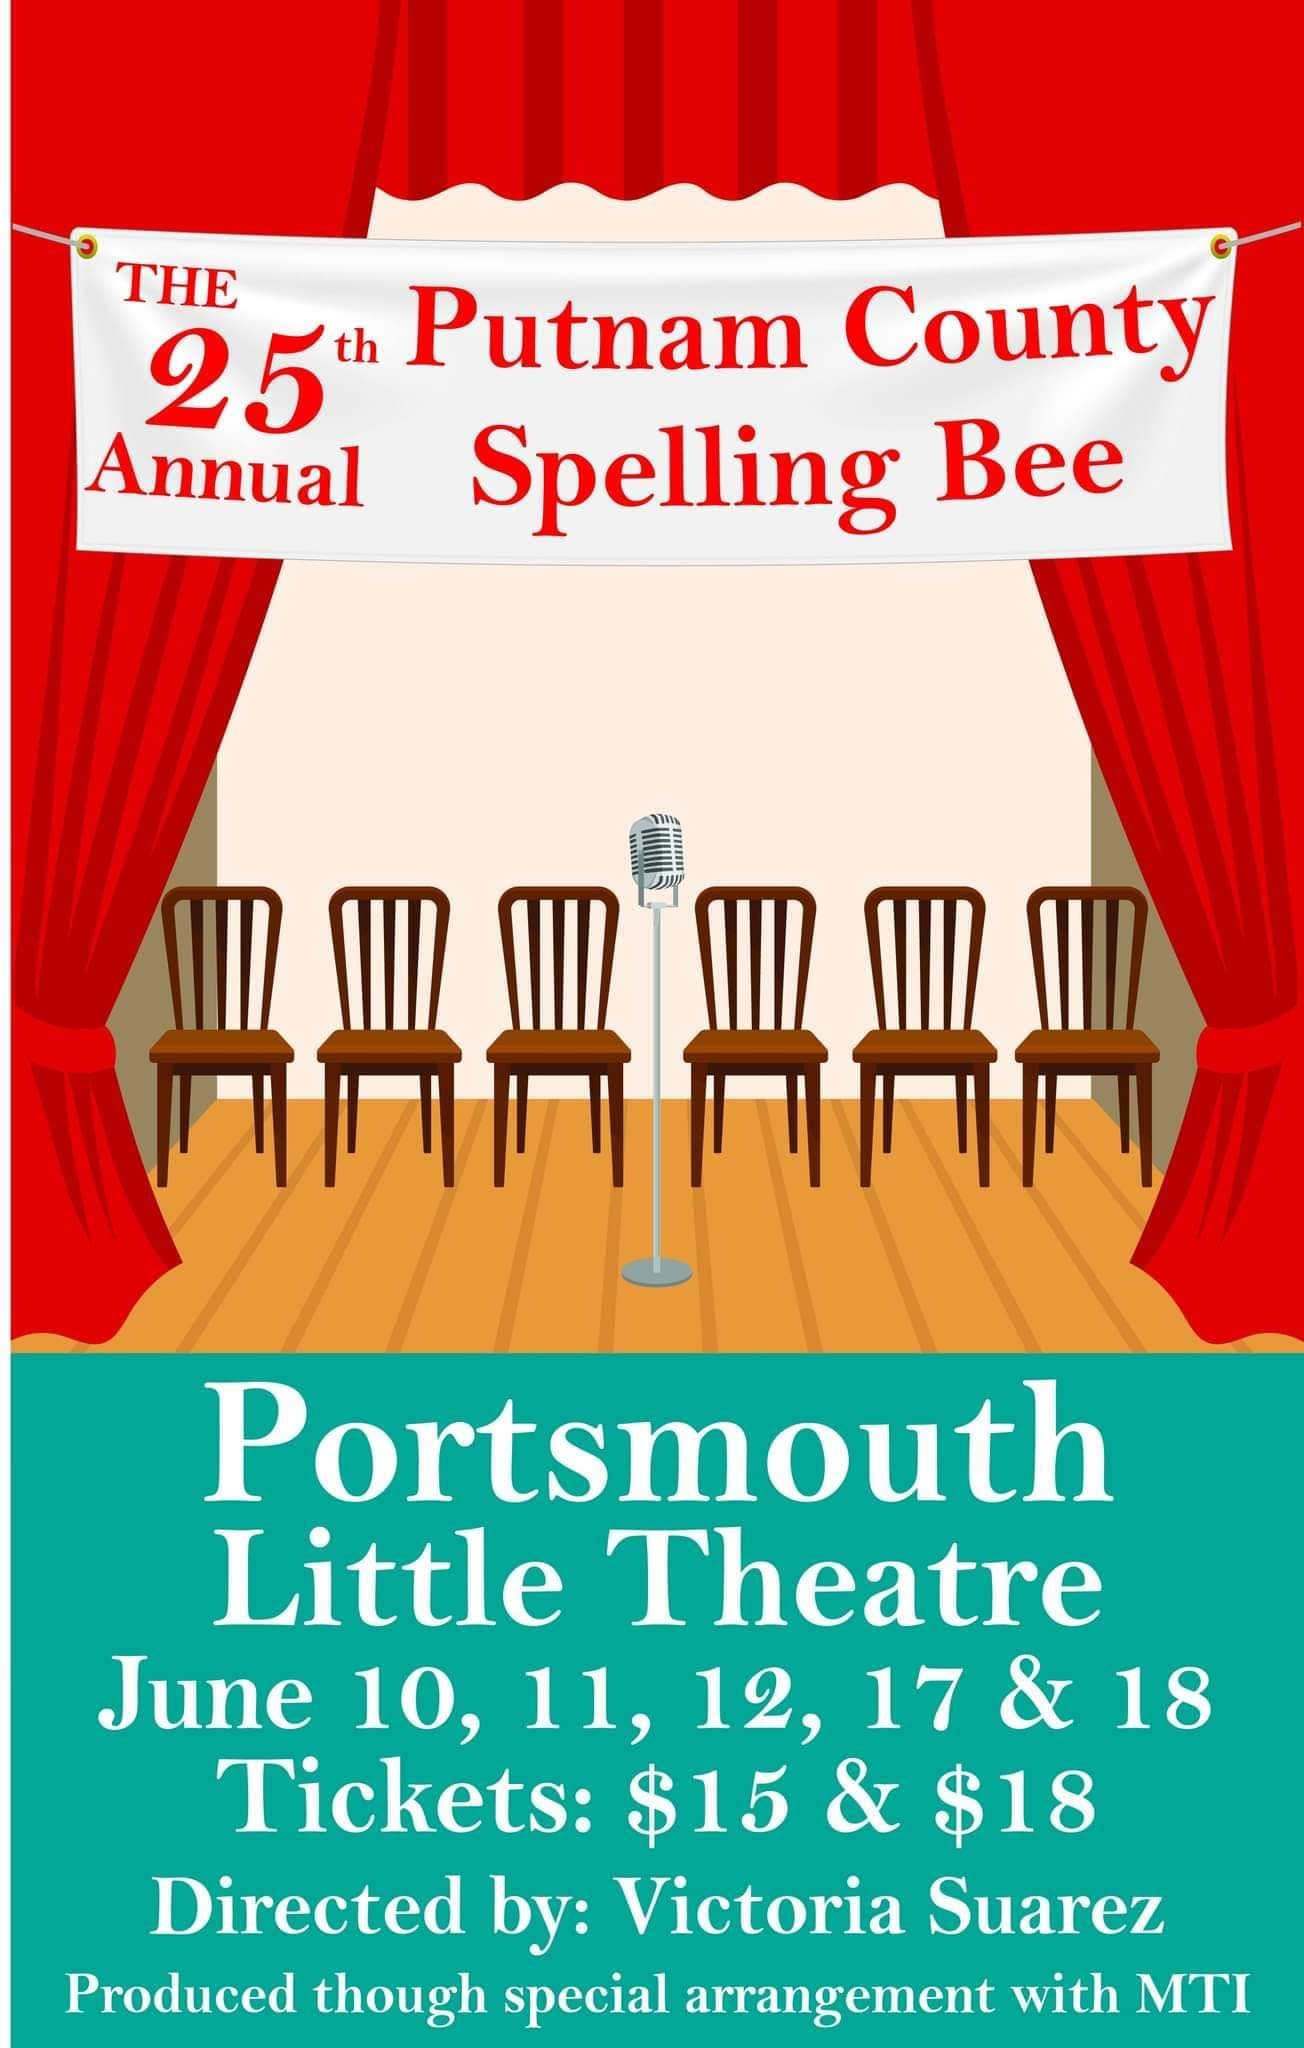 The 25th Annual Putnam County Spelling Bee  on Jun 17, 19:30@Portsmouth Little Theatre - Pick a seat, Buy tickets and Get information on Portsmouth Little Theatre 